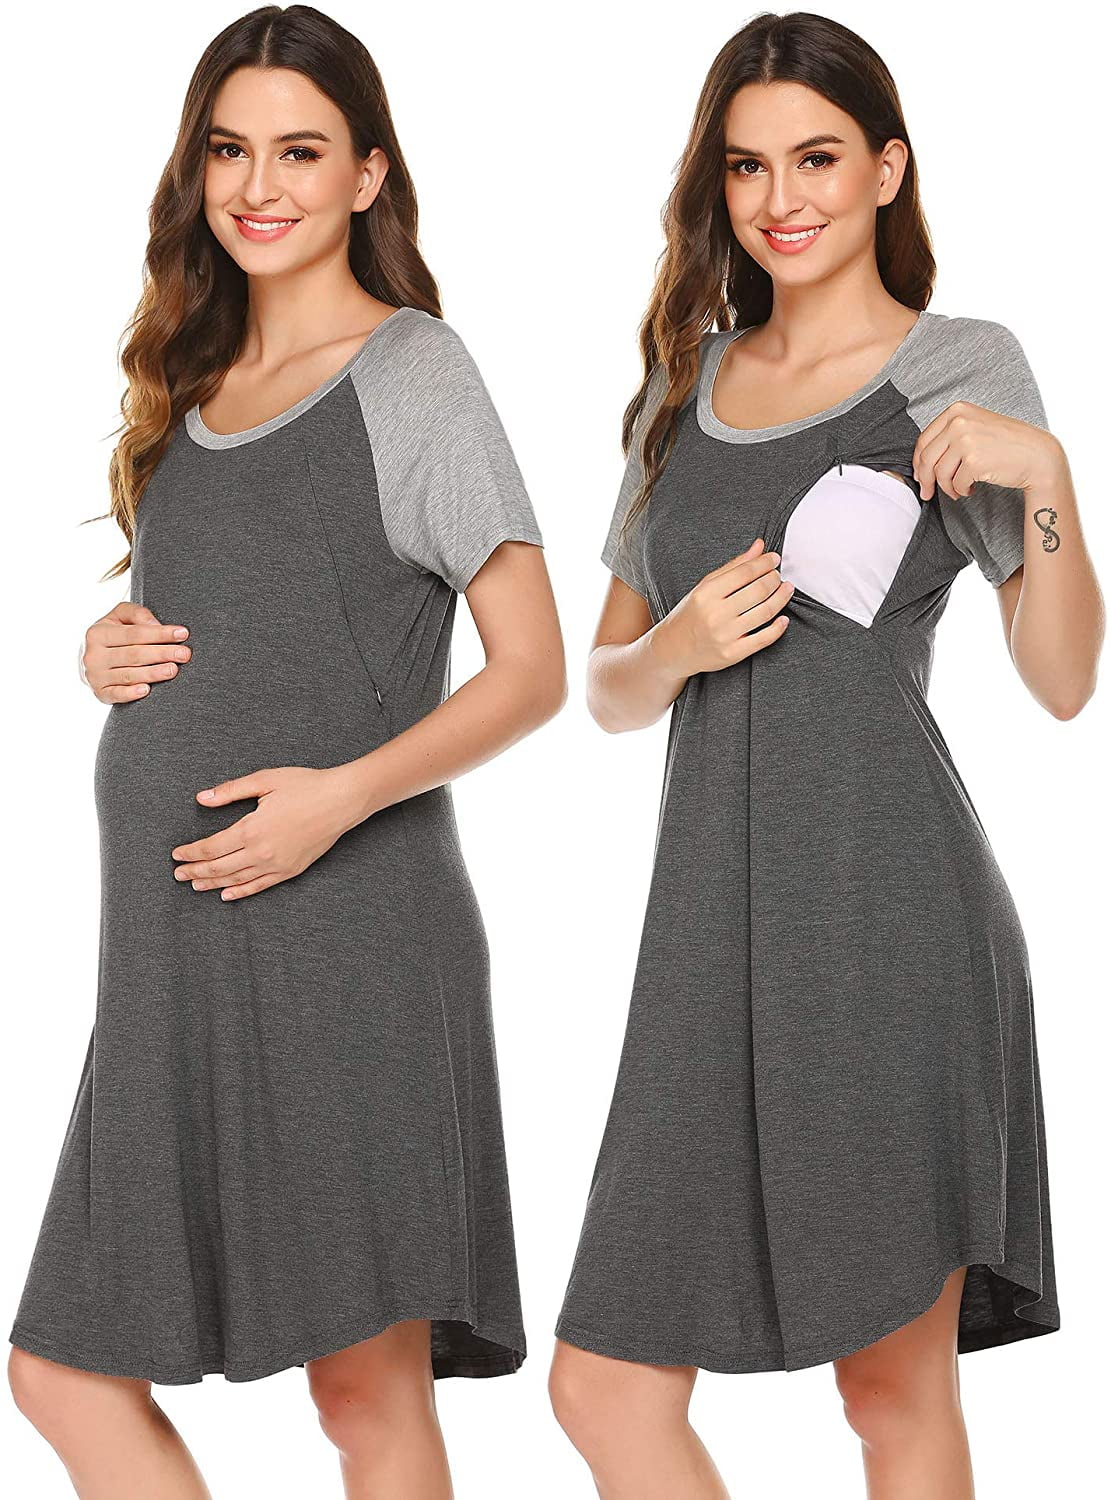 Women Maternity Hospital Gown 3-in-1 Hospital Gown for Labor and Delivery Nursing Nightgown Breastfeeding Dress